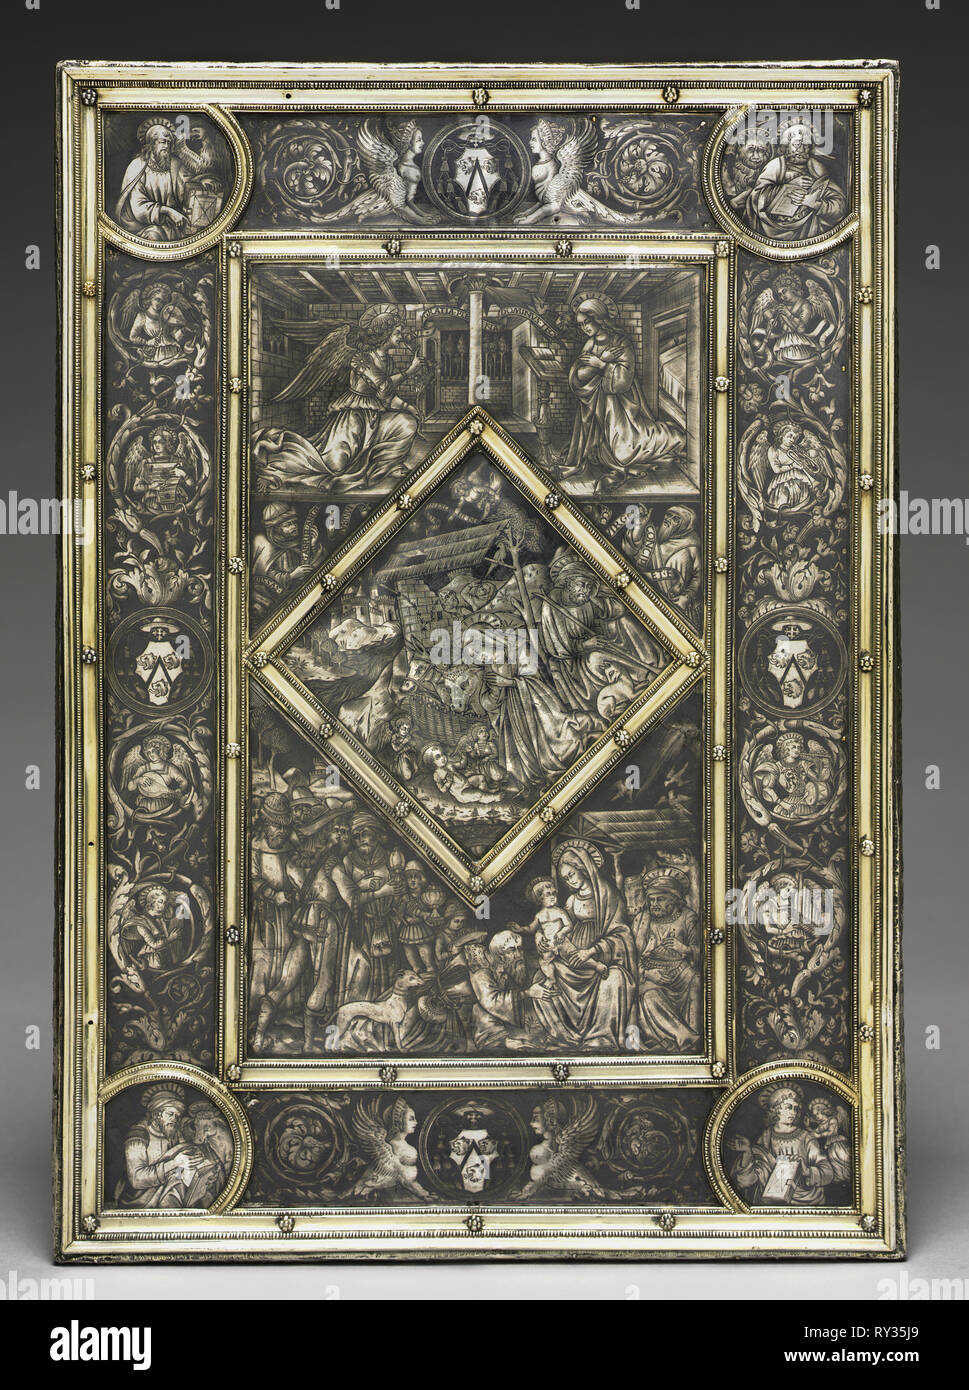 Front Cover for a Gospel Book of French Cardinal Jean La Balou (1421-1491), c. 1467-1468. Italy, Florence, 15th century. Nielloed silver plaques within gilt-silver borders; overall: 41.6 x 29.6 x 1.6 cm (16 3/8 x 11 5/8 x 5/8 in Stock Photo